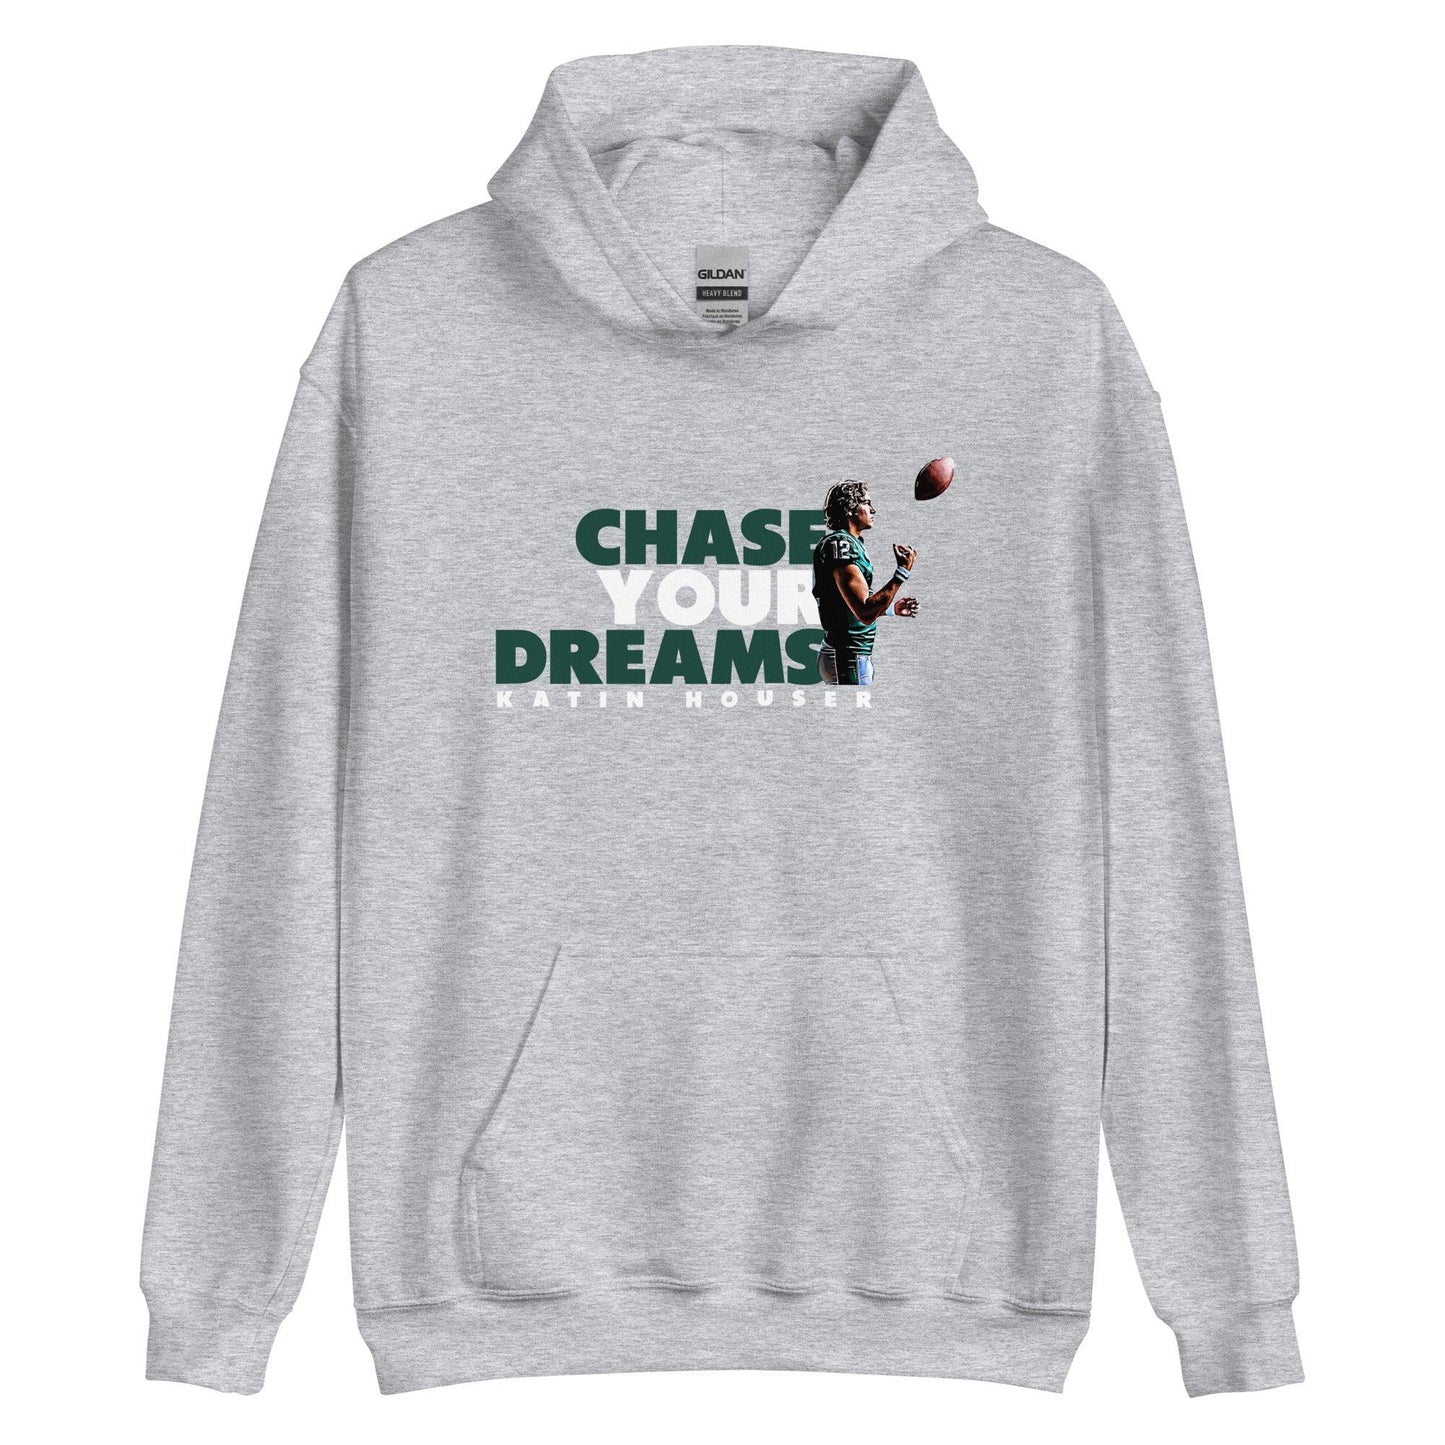 Katin Houser "Chase Your Dreams" Hoodie - Fan Arch